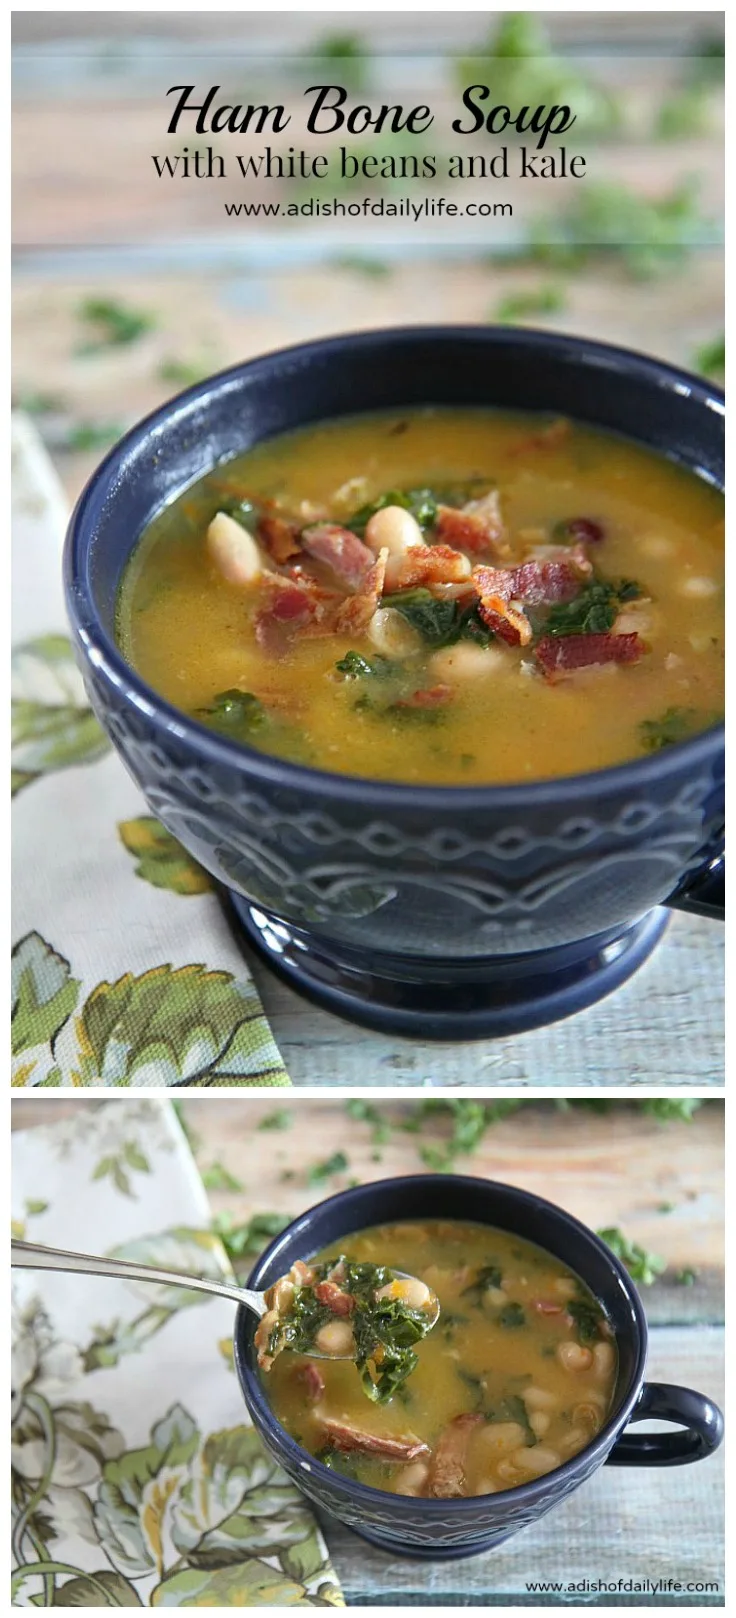 Rich in flavor, this hearty ham bone soup with white beans and kale is the perfect comfort food to warm your bones on a chilly or damp and rainy day. Great way to use up your leftover Christmas or Easter ham bone as well!